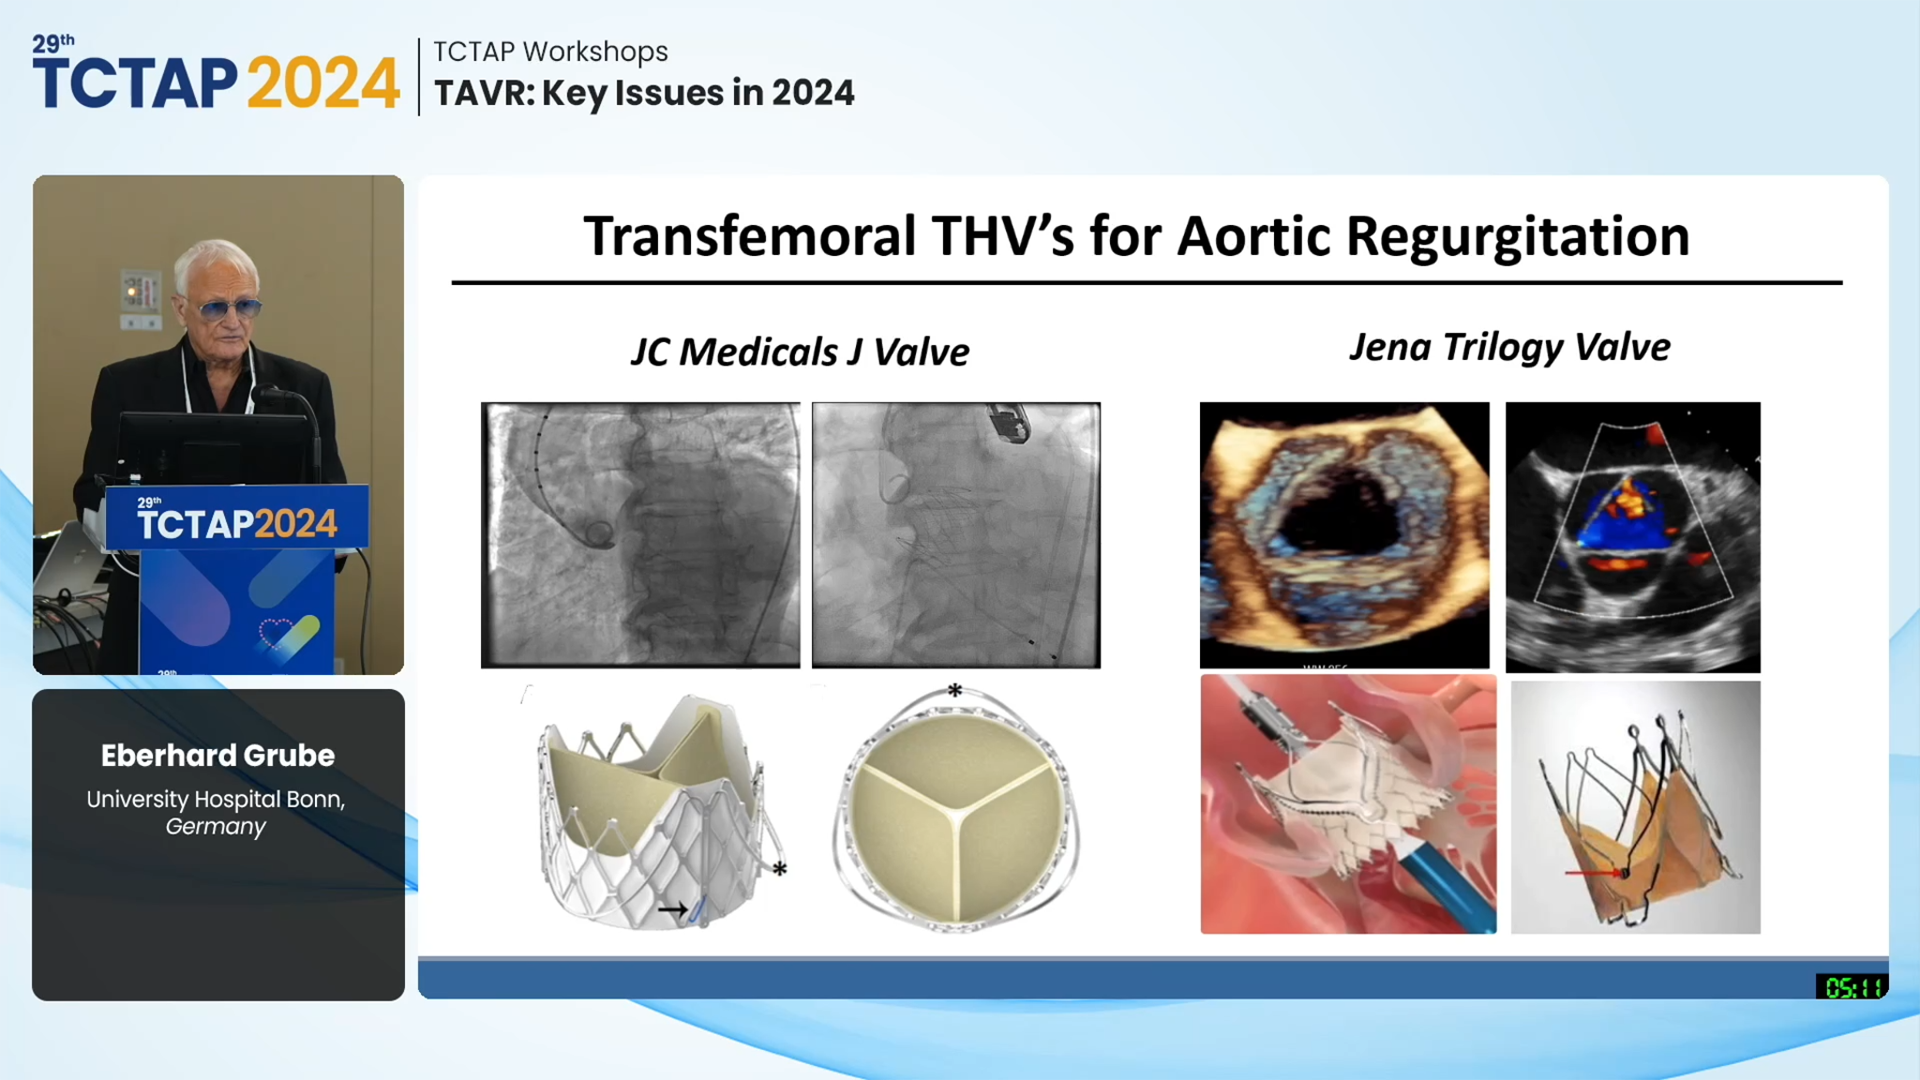 [TCTAP Workshops] TAVR: Key Issues in 2024